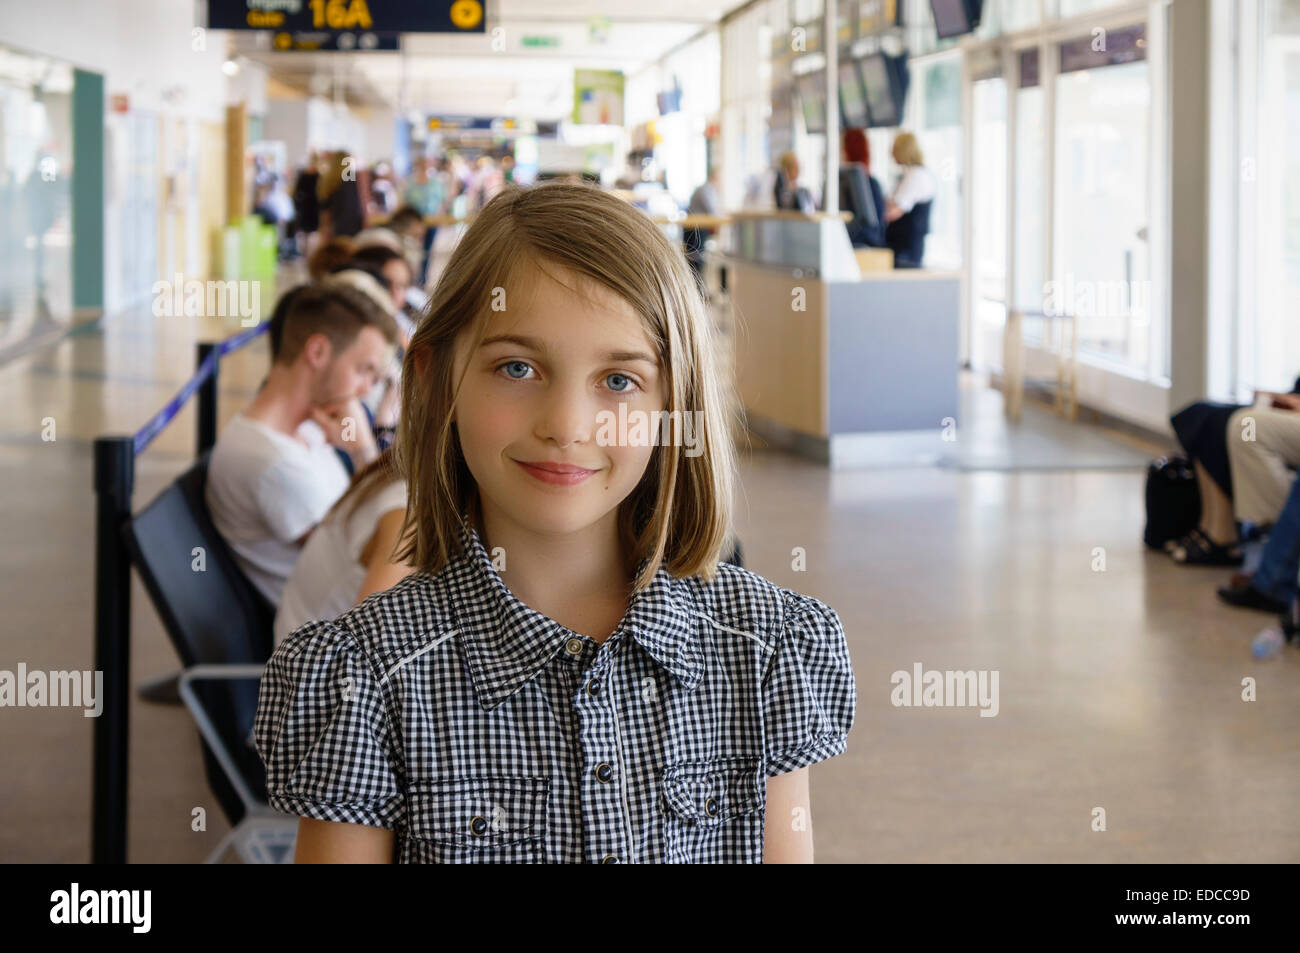 Young girl looking at camera waiting at airport boarding gate lounge  Model Release: Yes (young girl only).  Property Release: No. Stock Photo